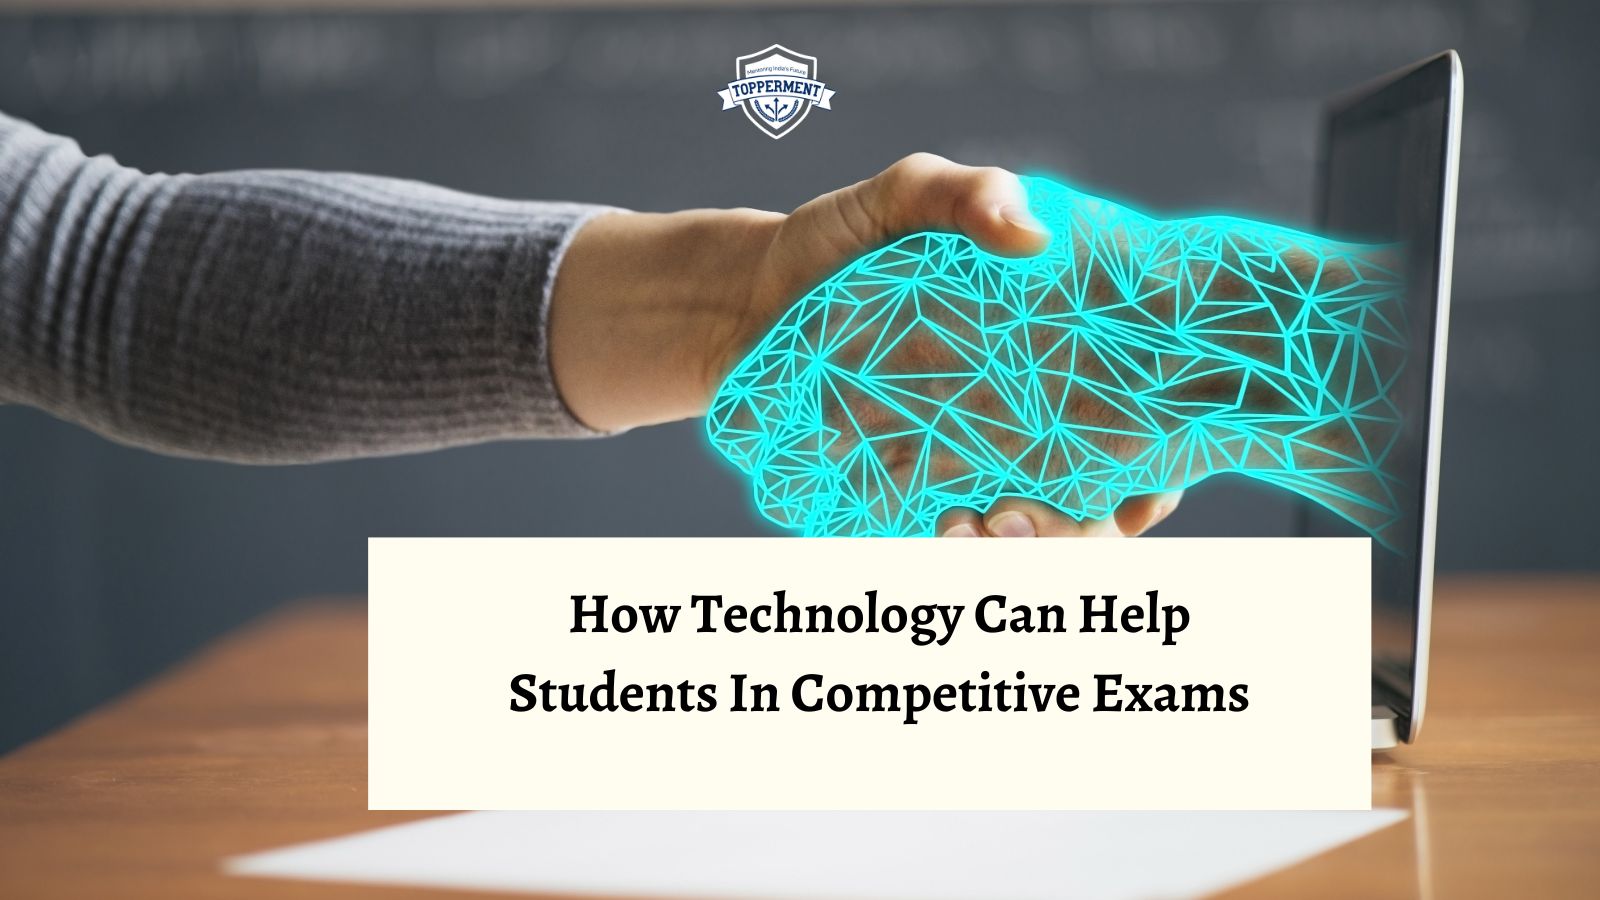 How Technology can help students in competitive exams?-TopperMent